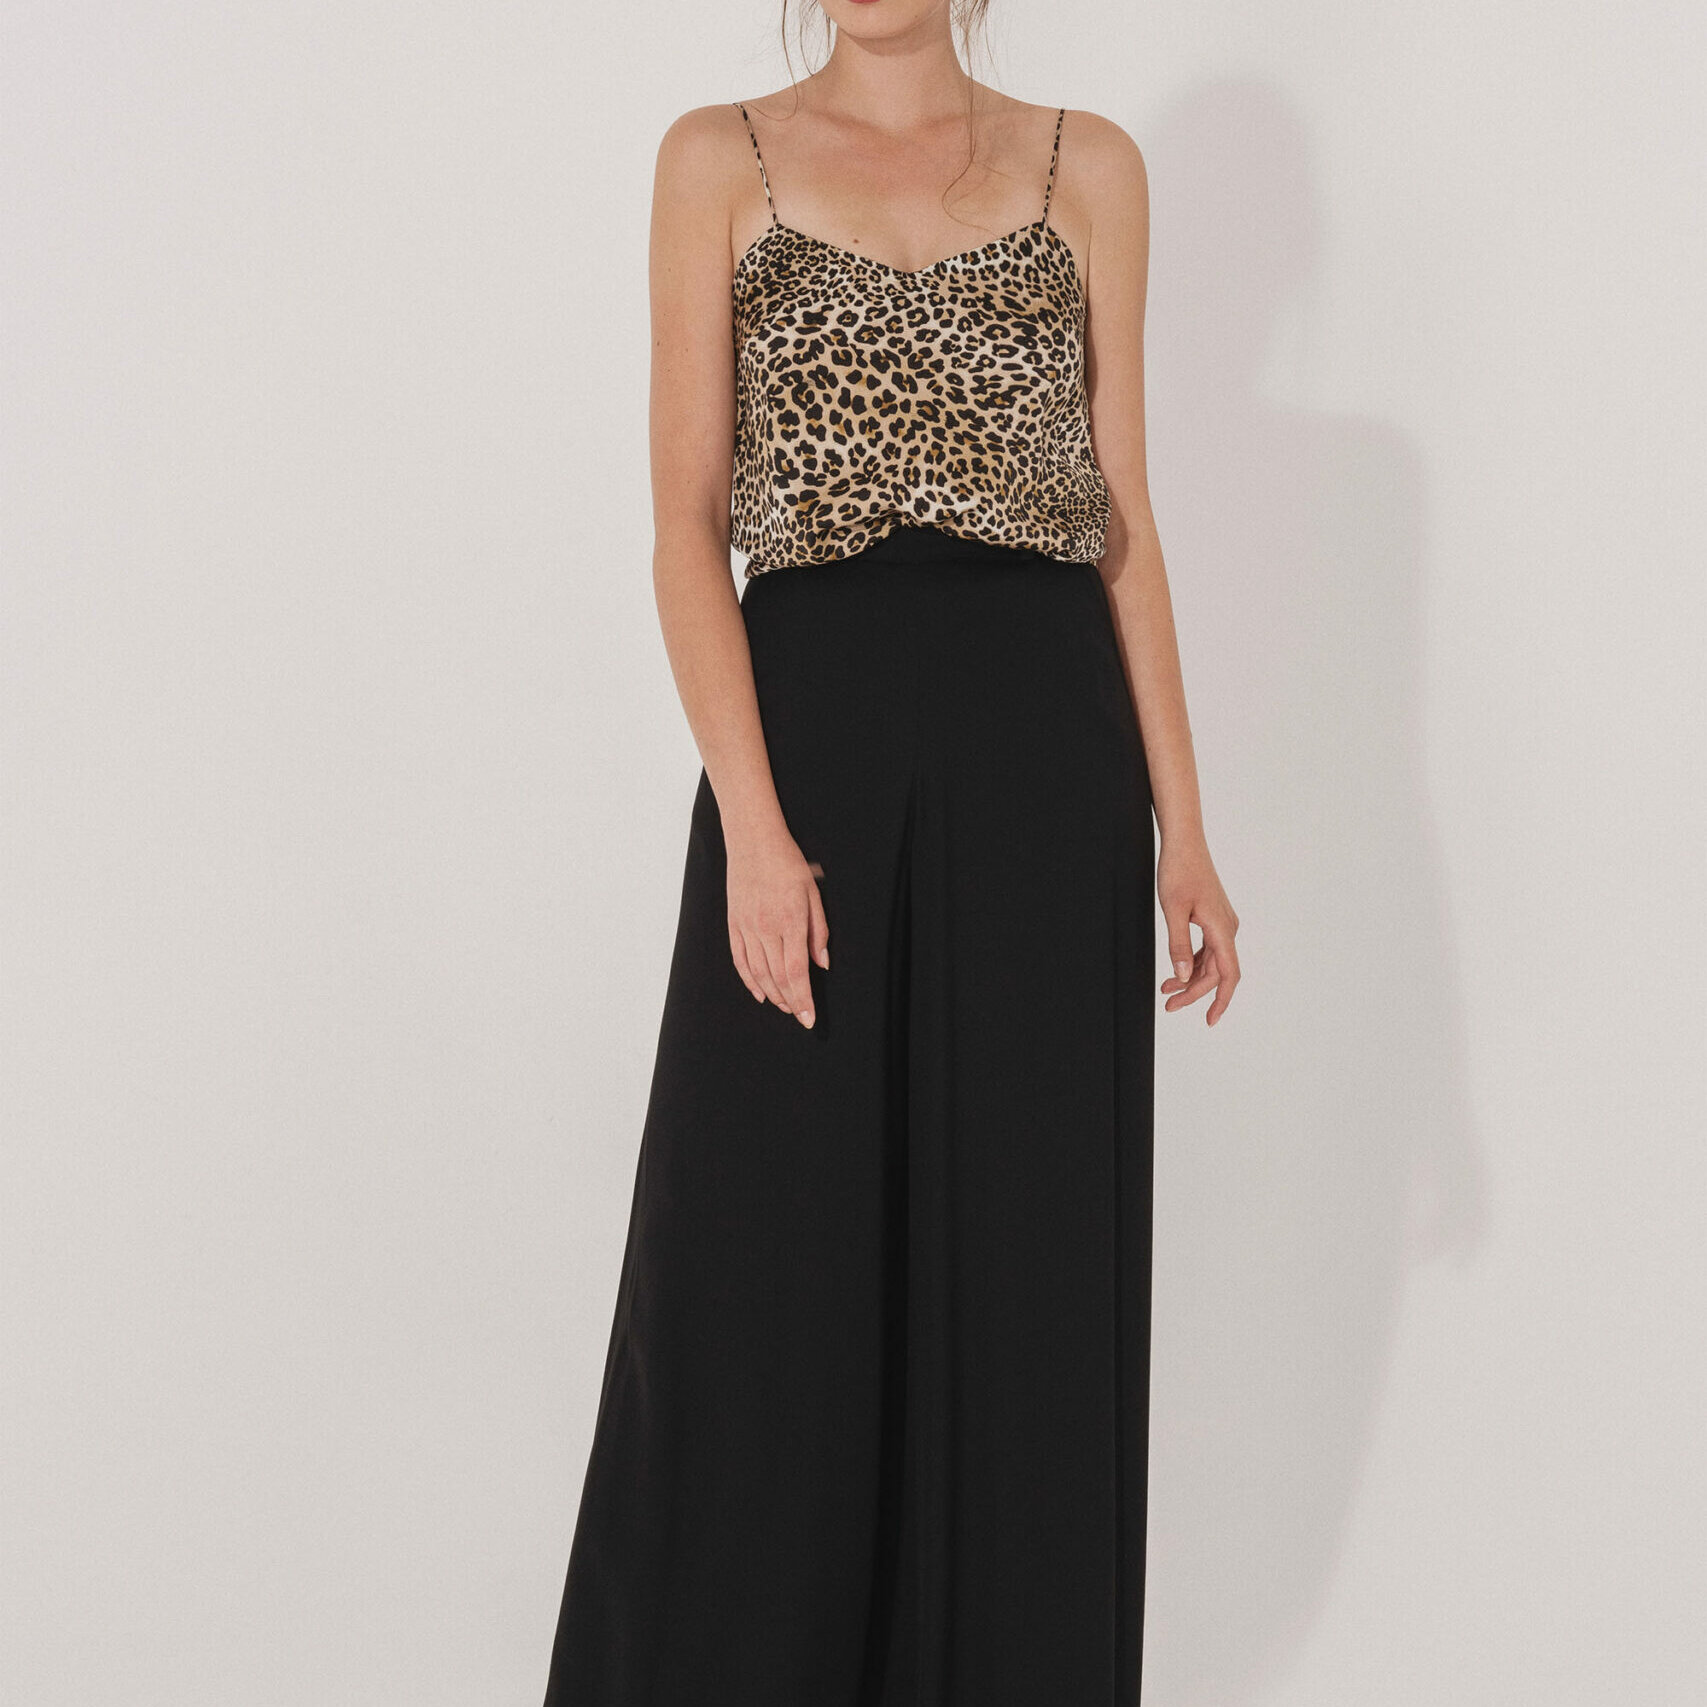 V neck strappy top with leopard print main scaled uai • Sassa Björg